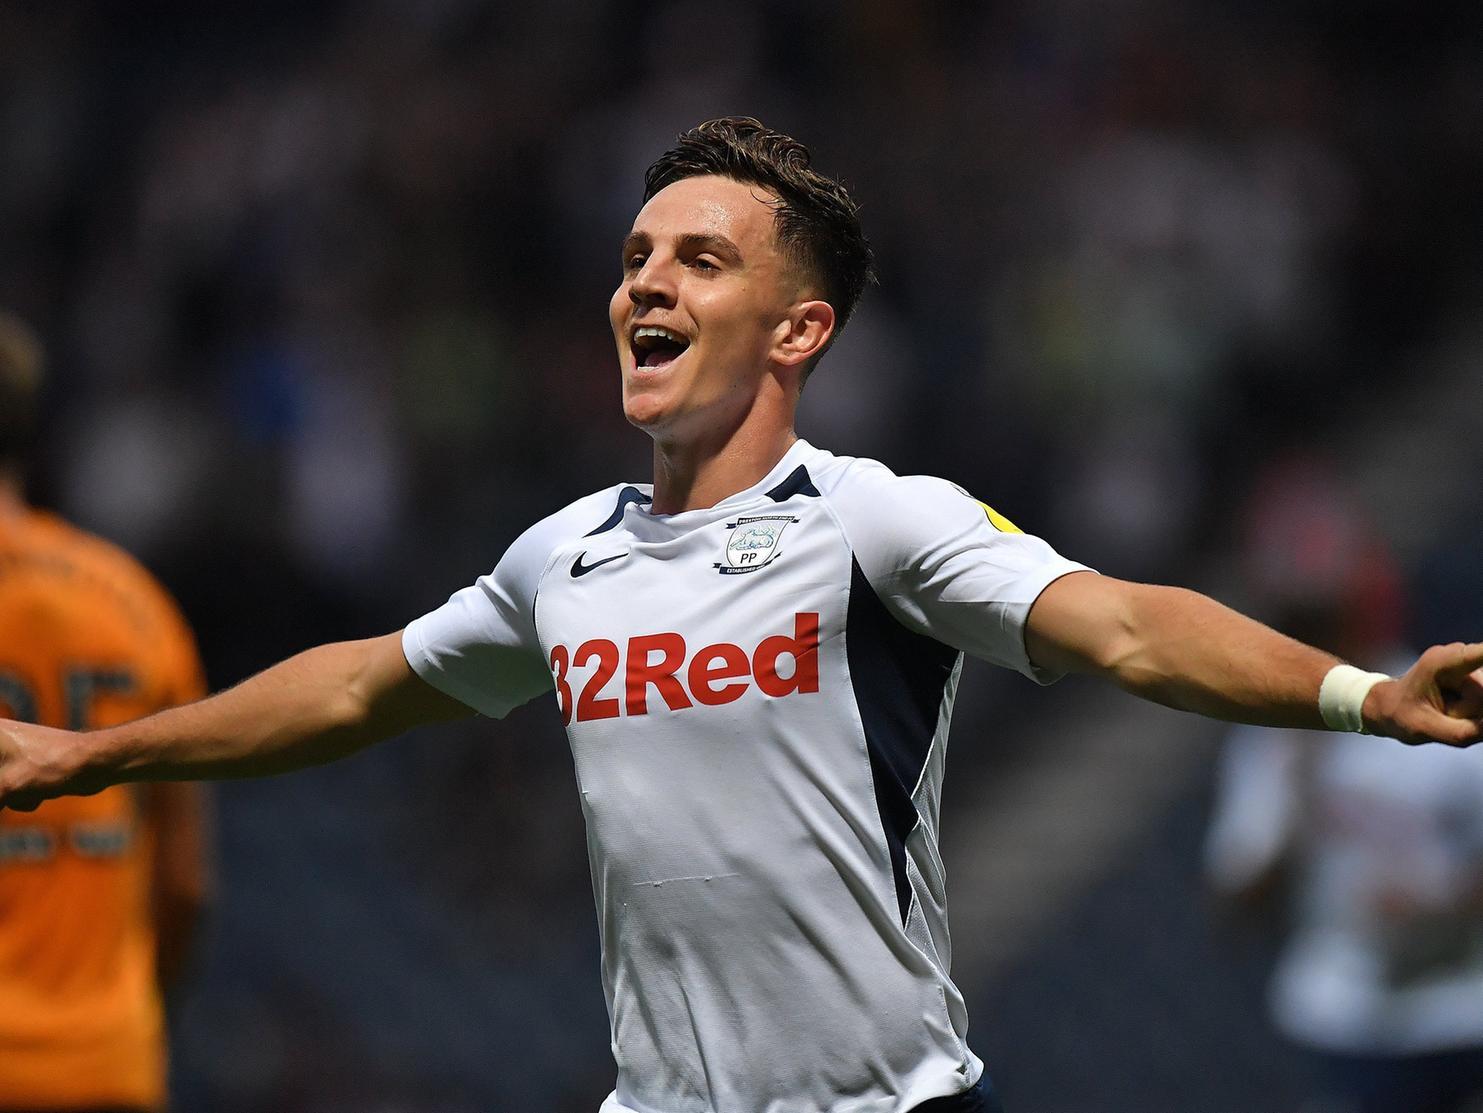 Josh Harrop celebrates scoring at Deepdale this season, as PNE drew 2-2 in the Carabao Cup. Jarrod Bowen's late equaliser took the game to penalties which North End won.